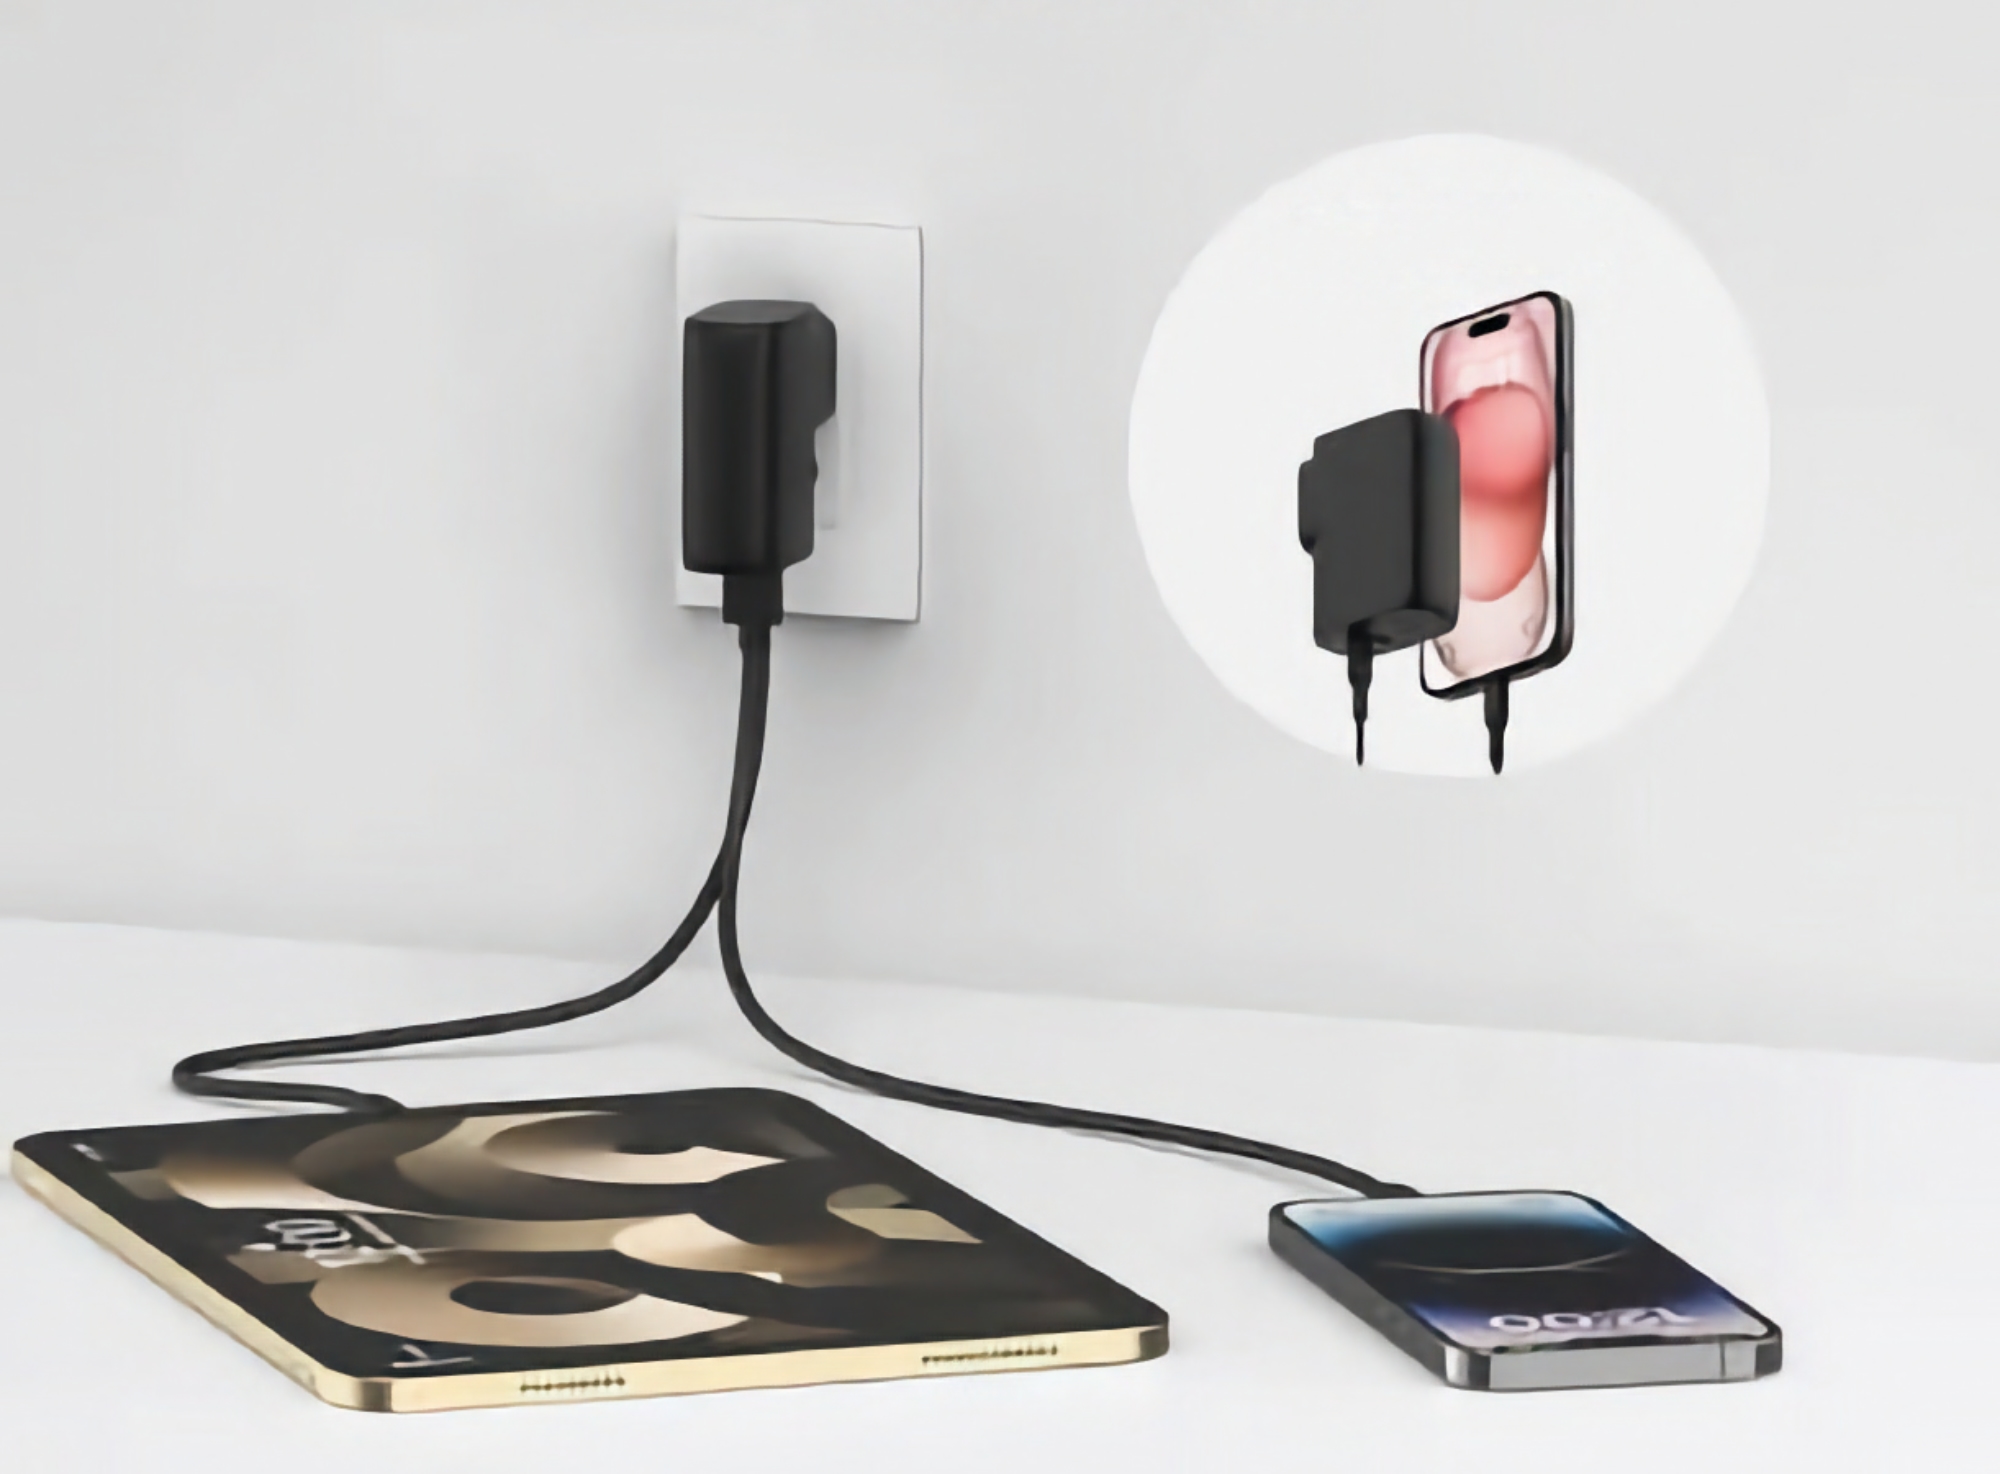 Belkin has unveiled a 25W charger with two ports and a built-in 4800mAh battery